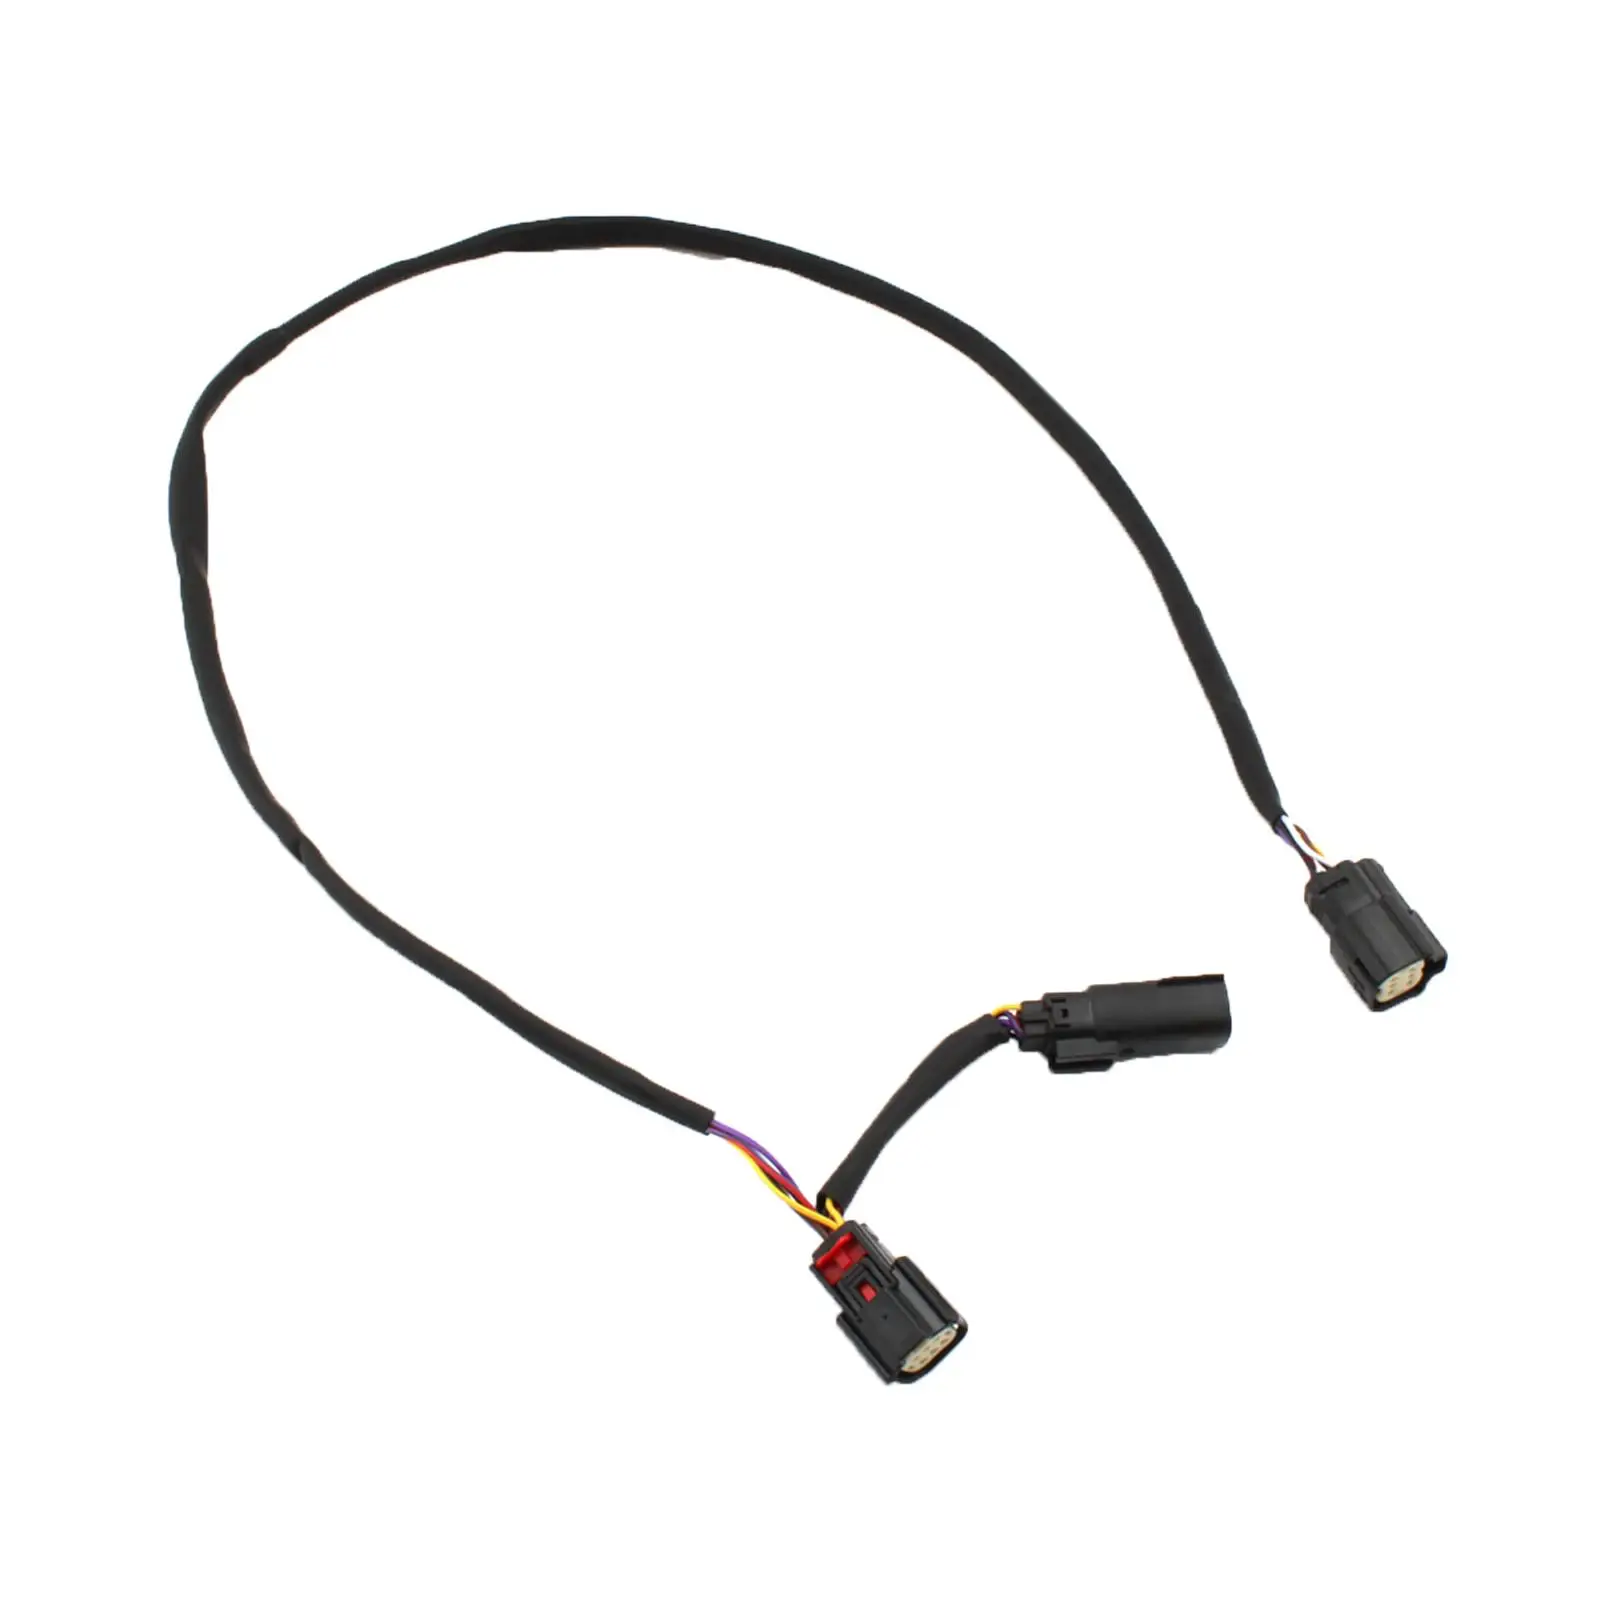 Quick Disconnect Wiring Harness for Spare Parts Premium